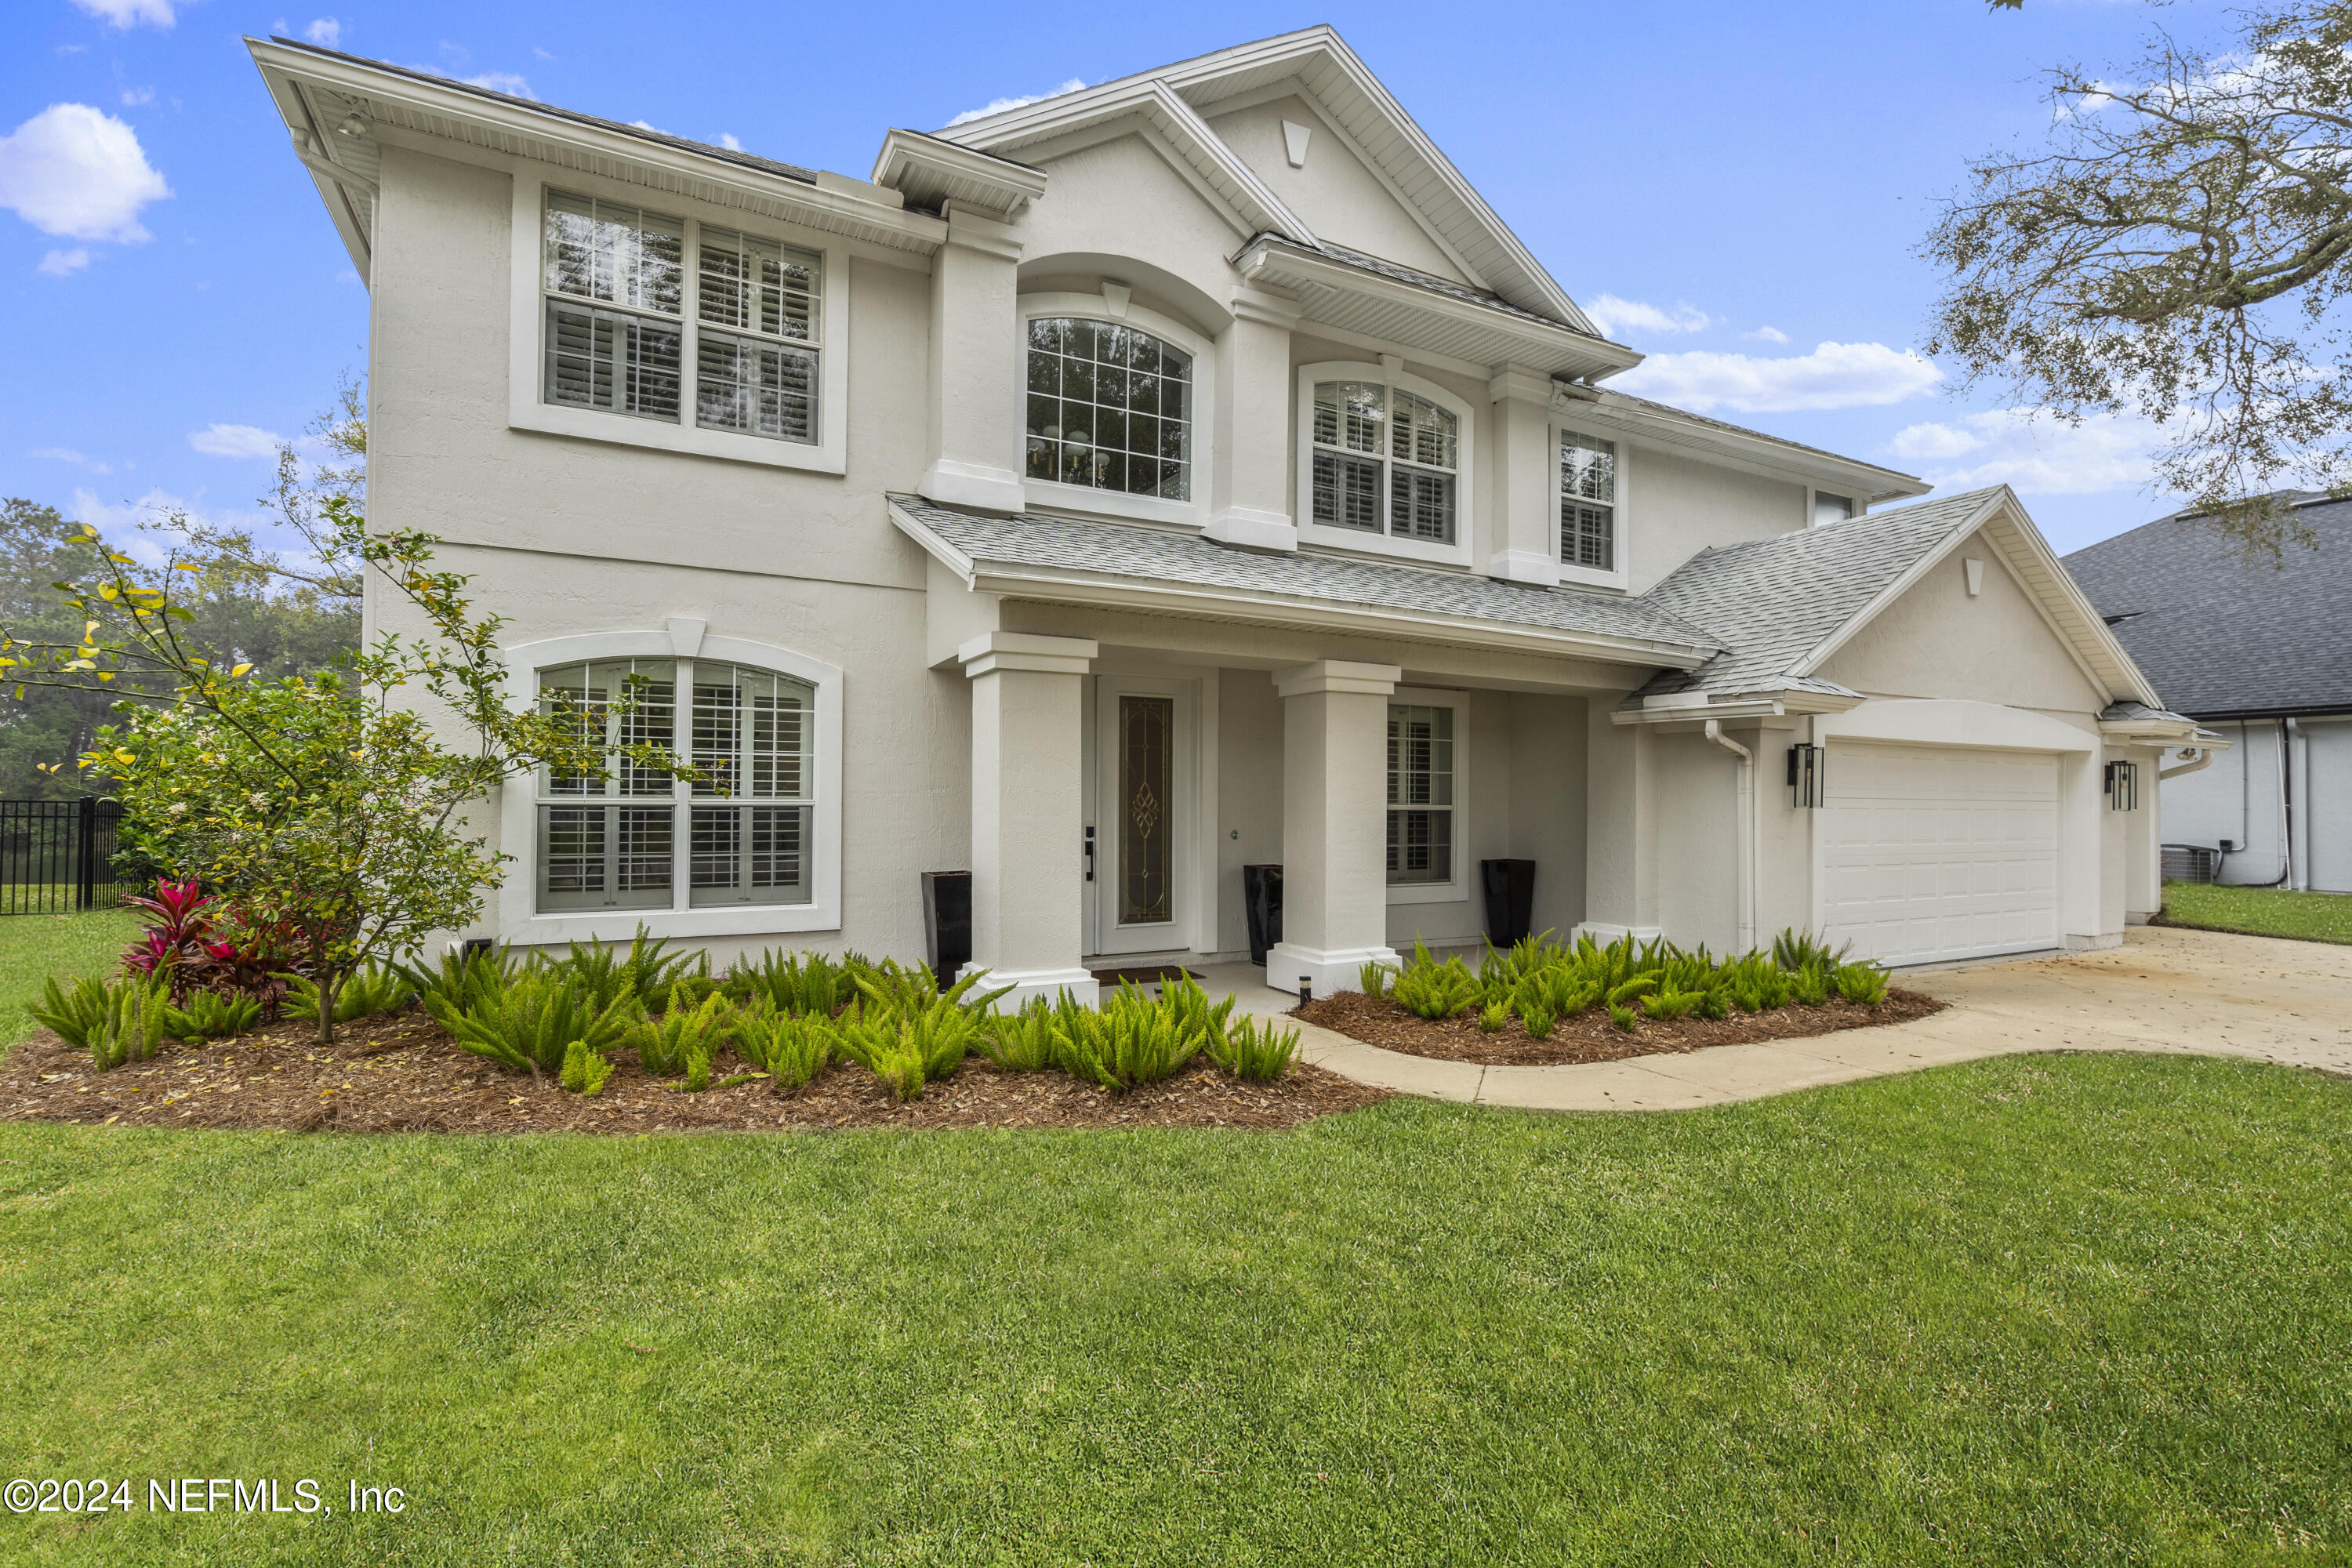 Ponte Vedra Beach, FL home for sale located at 528 SEA LAKE Lane, Ponte Vedra Beach, FL 32082